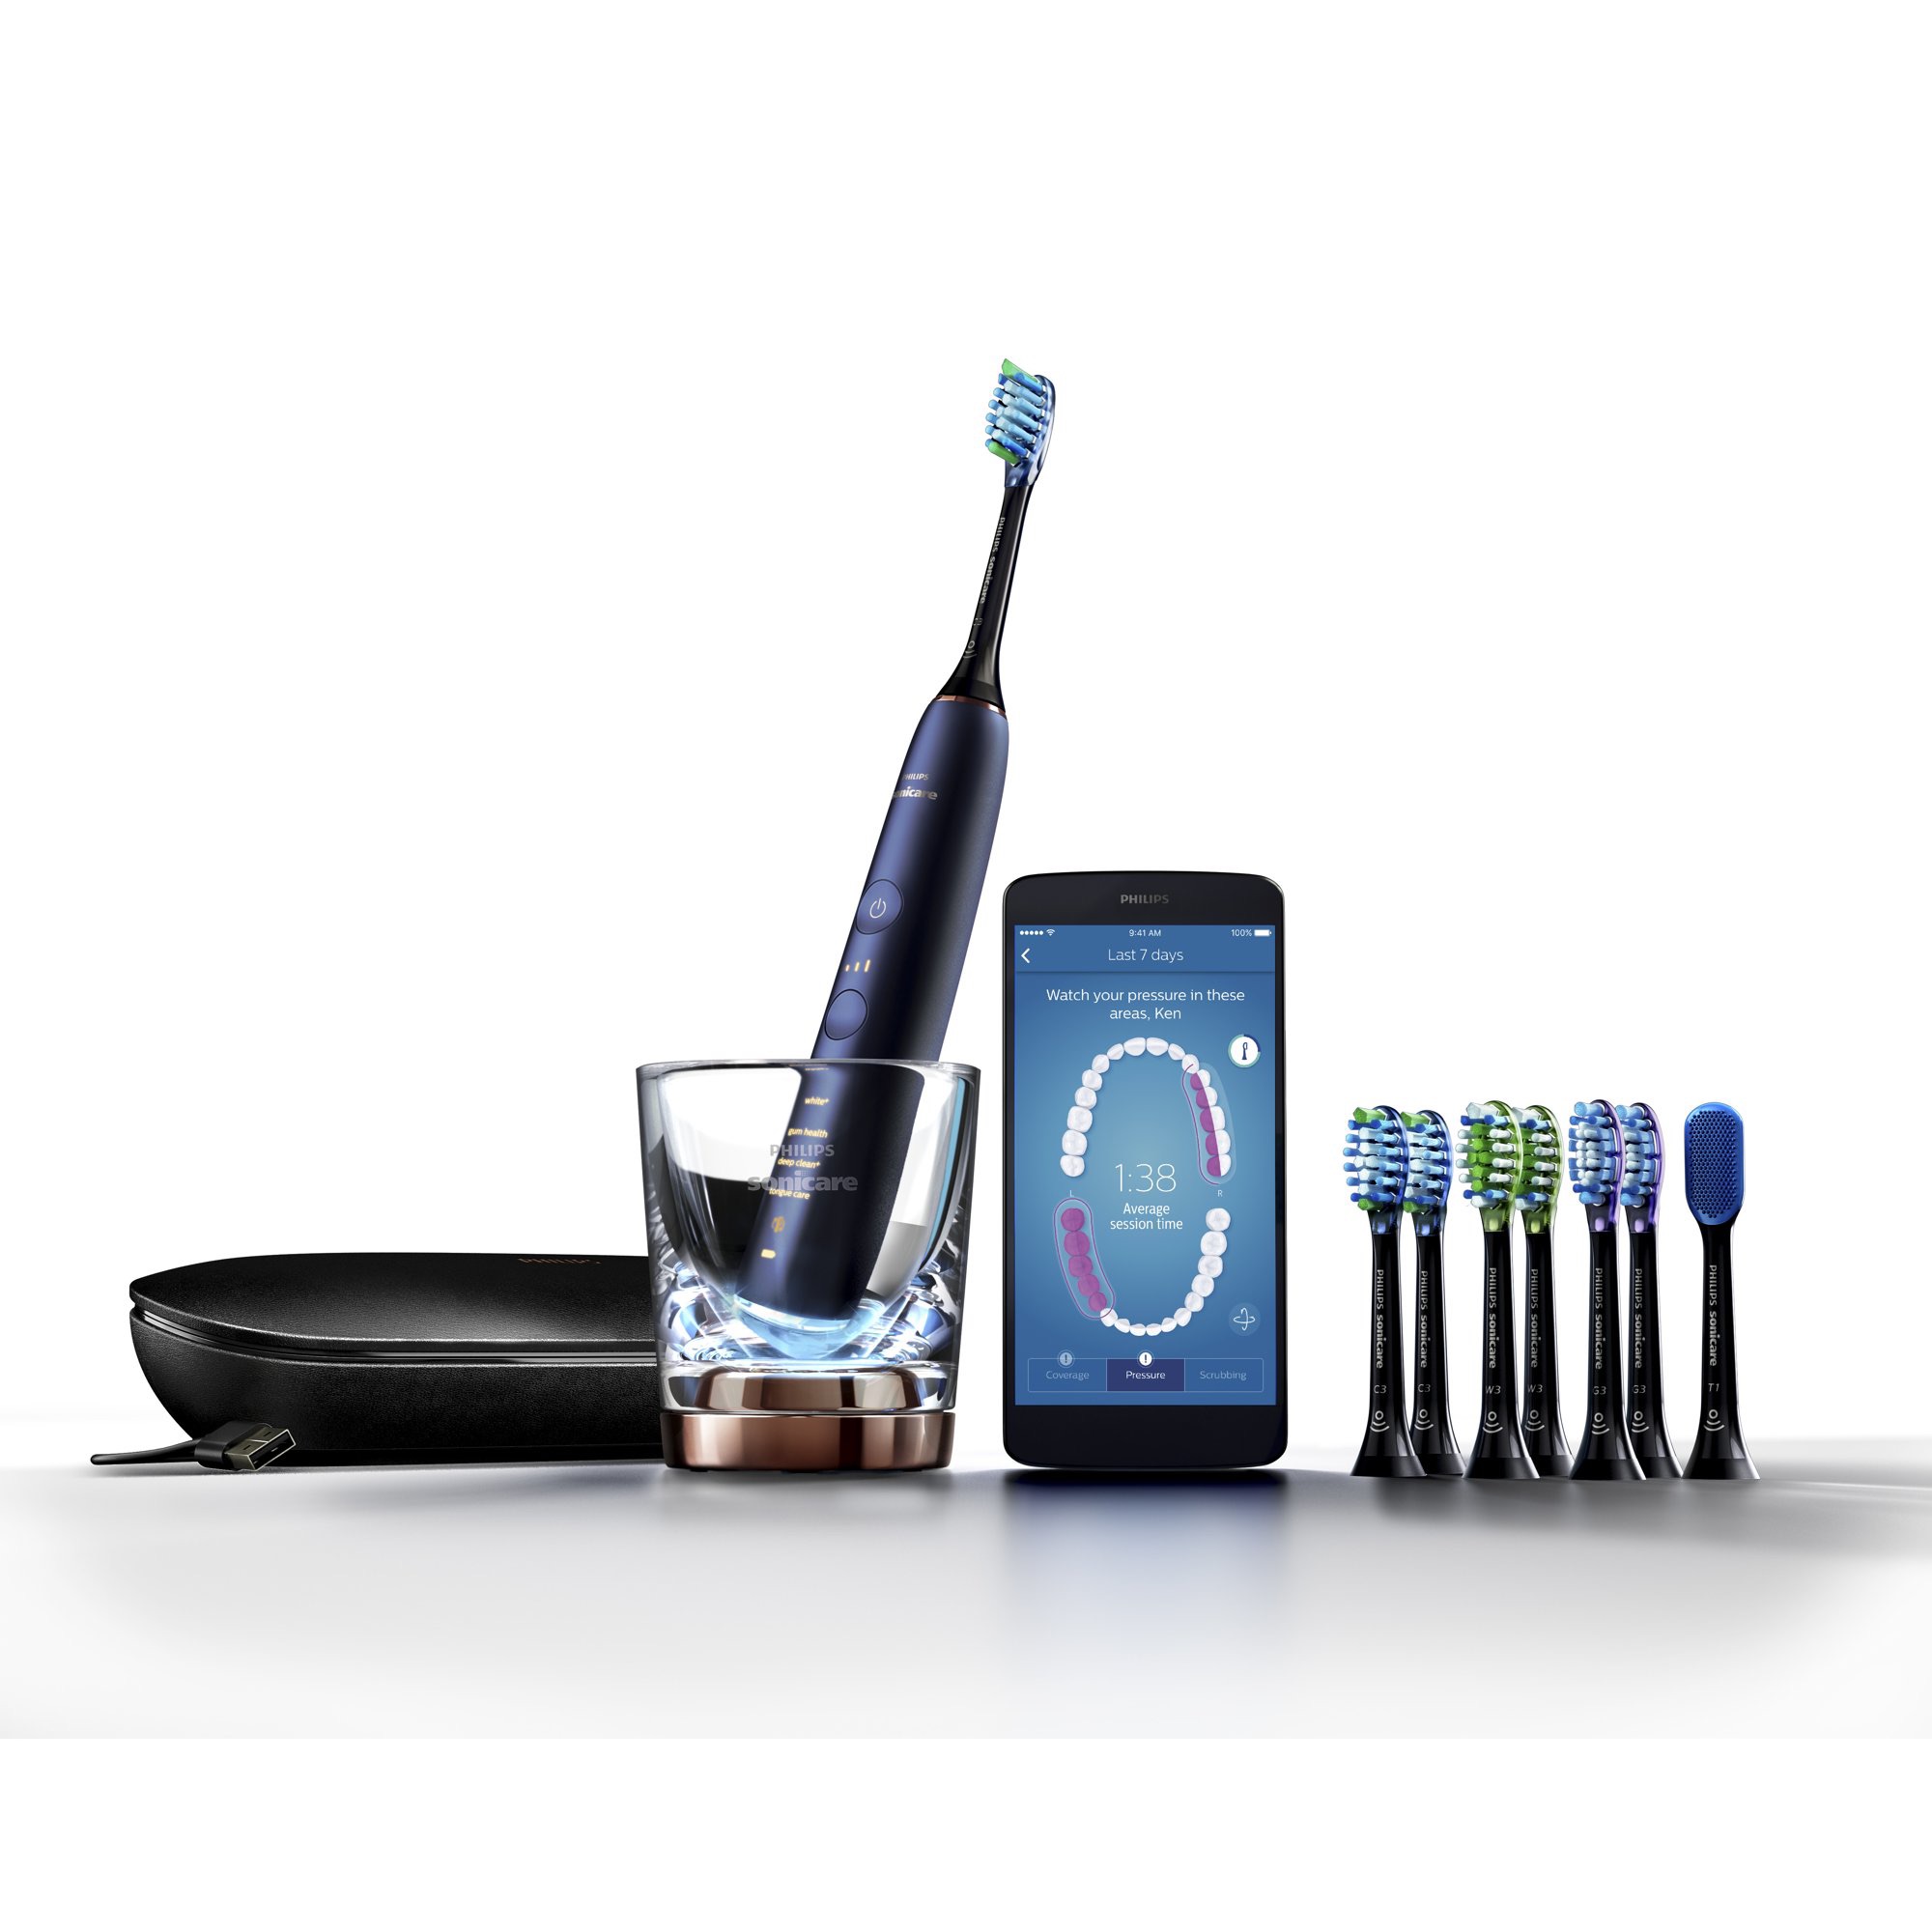 Philips Sonicare DiamondClean Smart Electric, Rechargeable toothbrush for Complete Oral Care, with Charging Travel Case, 5 modes, and 8 Brush Heads – 9700 Series, Lunar Blue自营